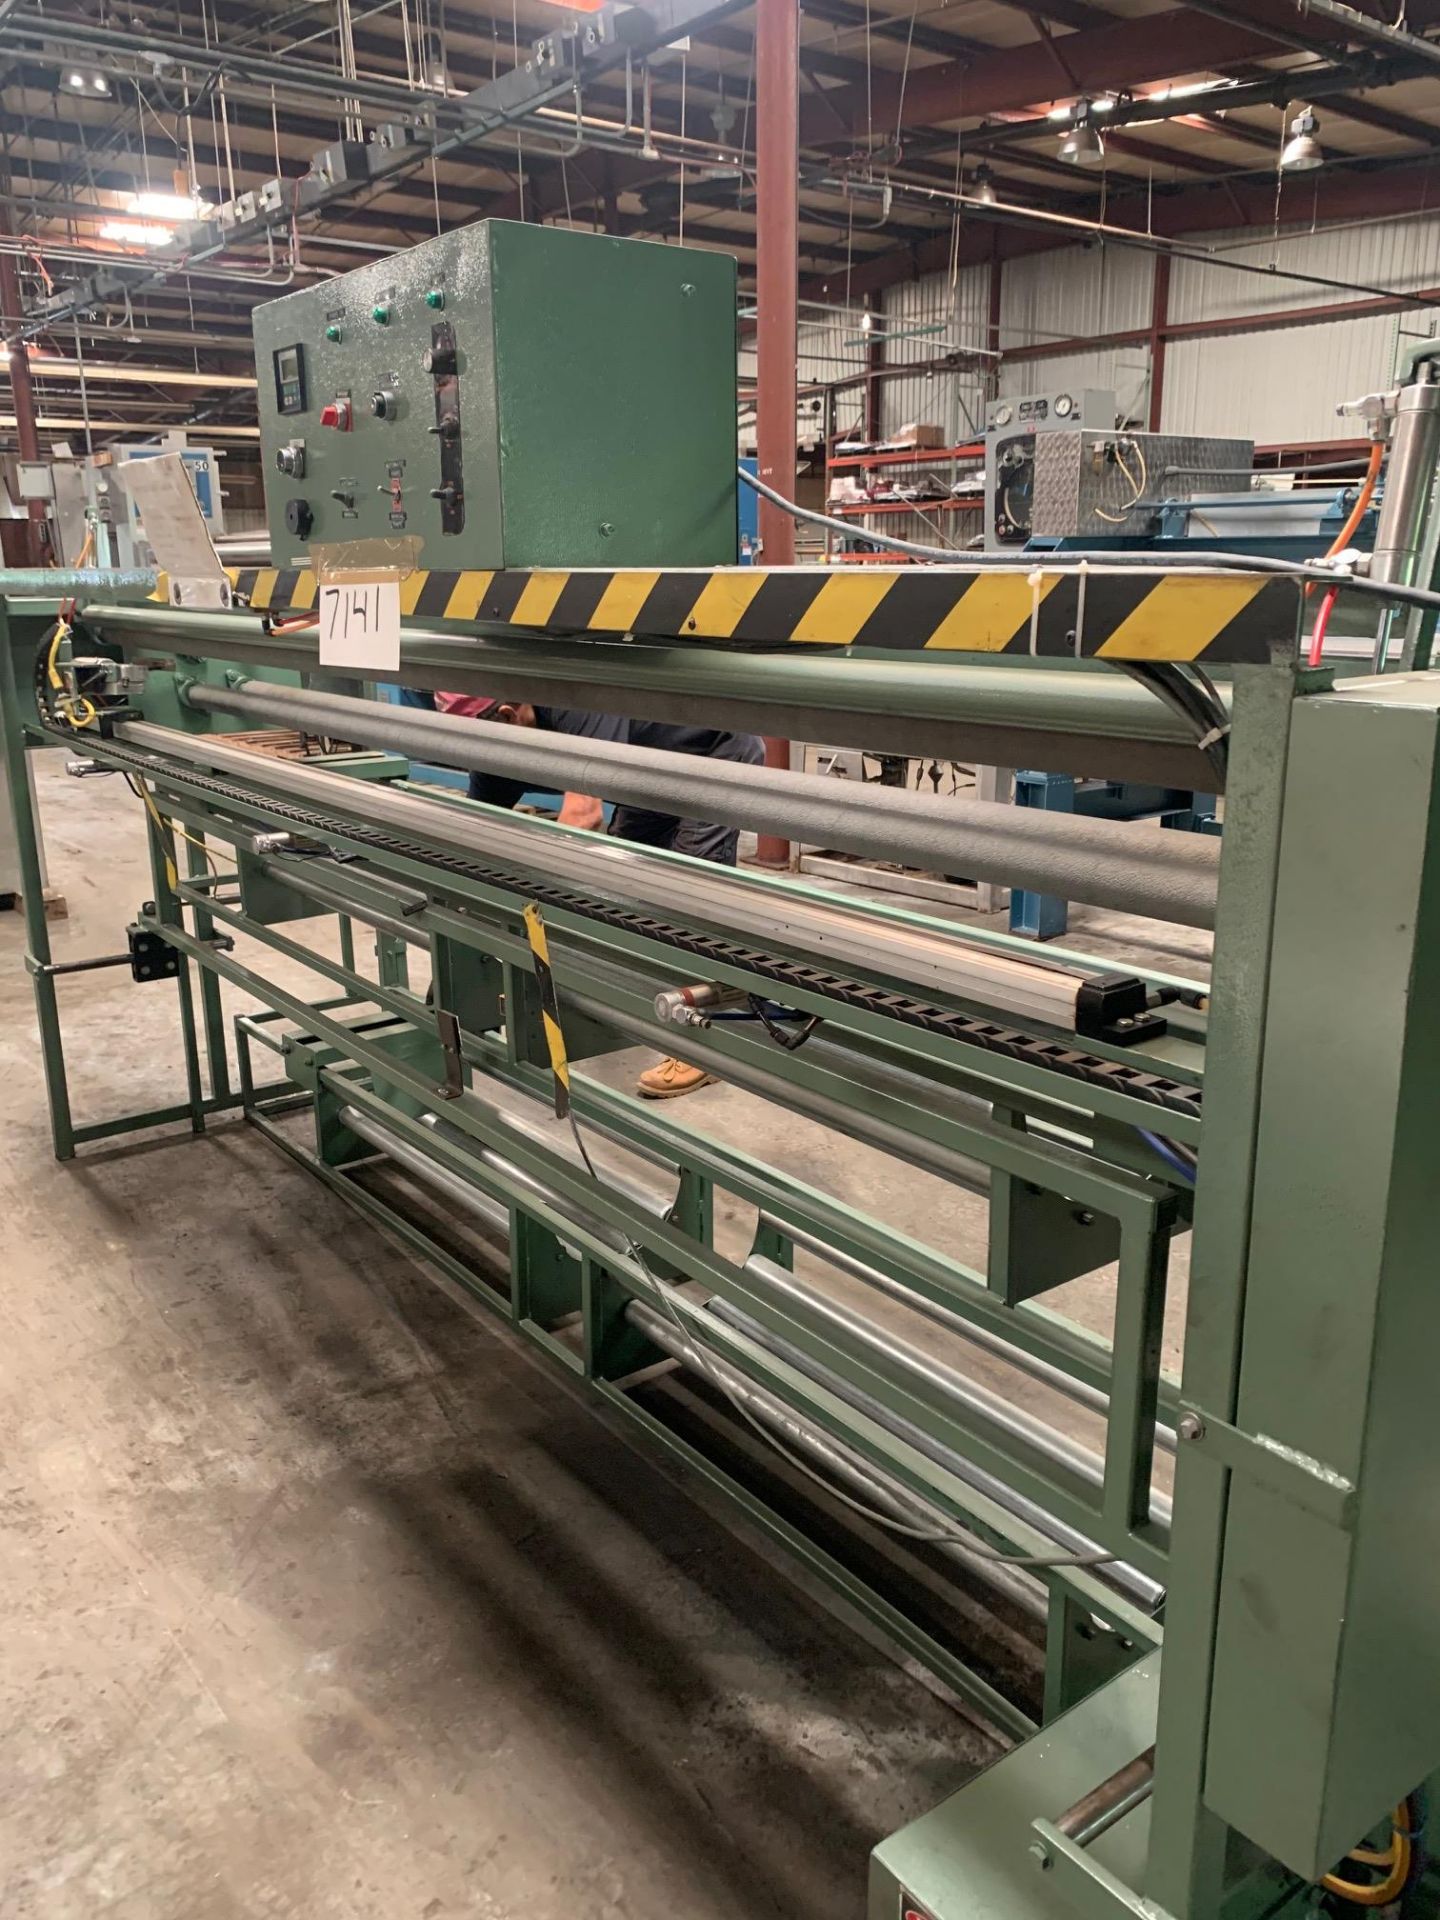 Cutting panels machine 10' 120 volts, Rigging Fee: $150 - Image 6 of 13